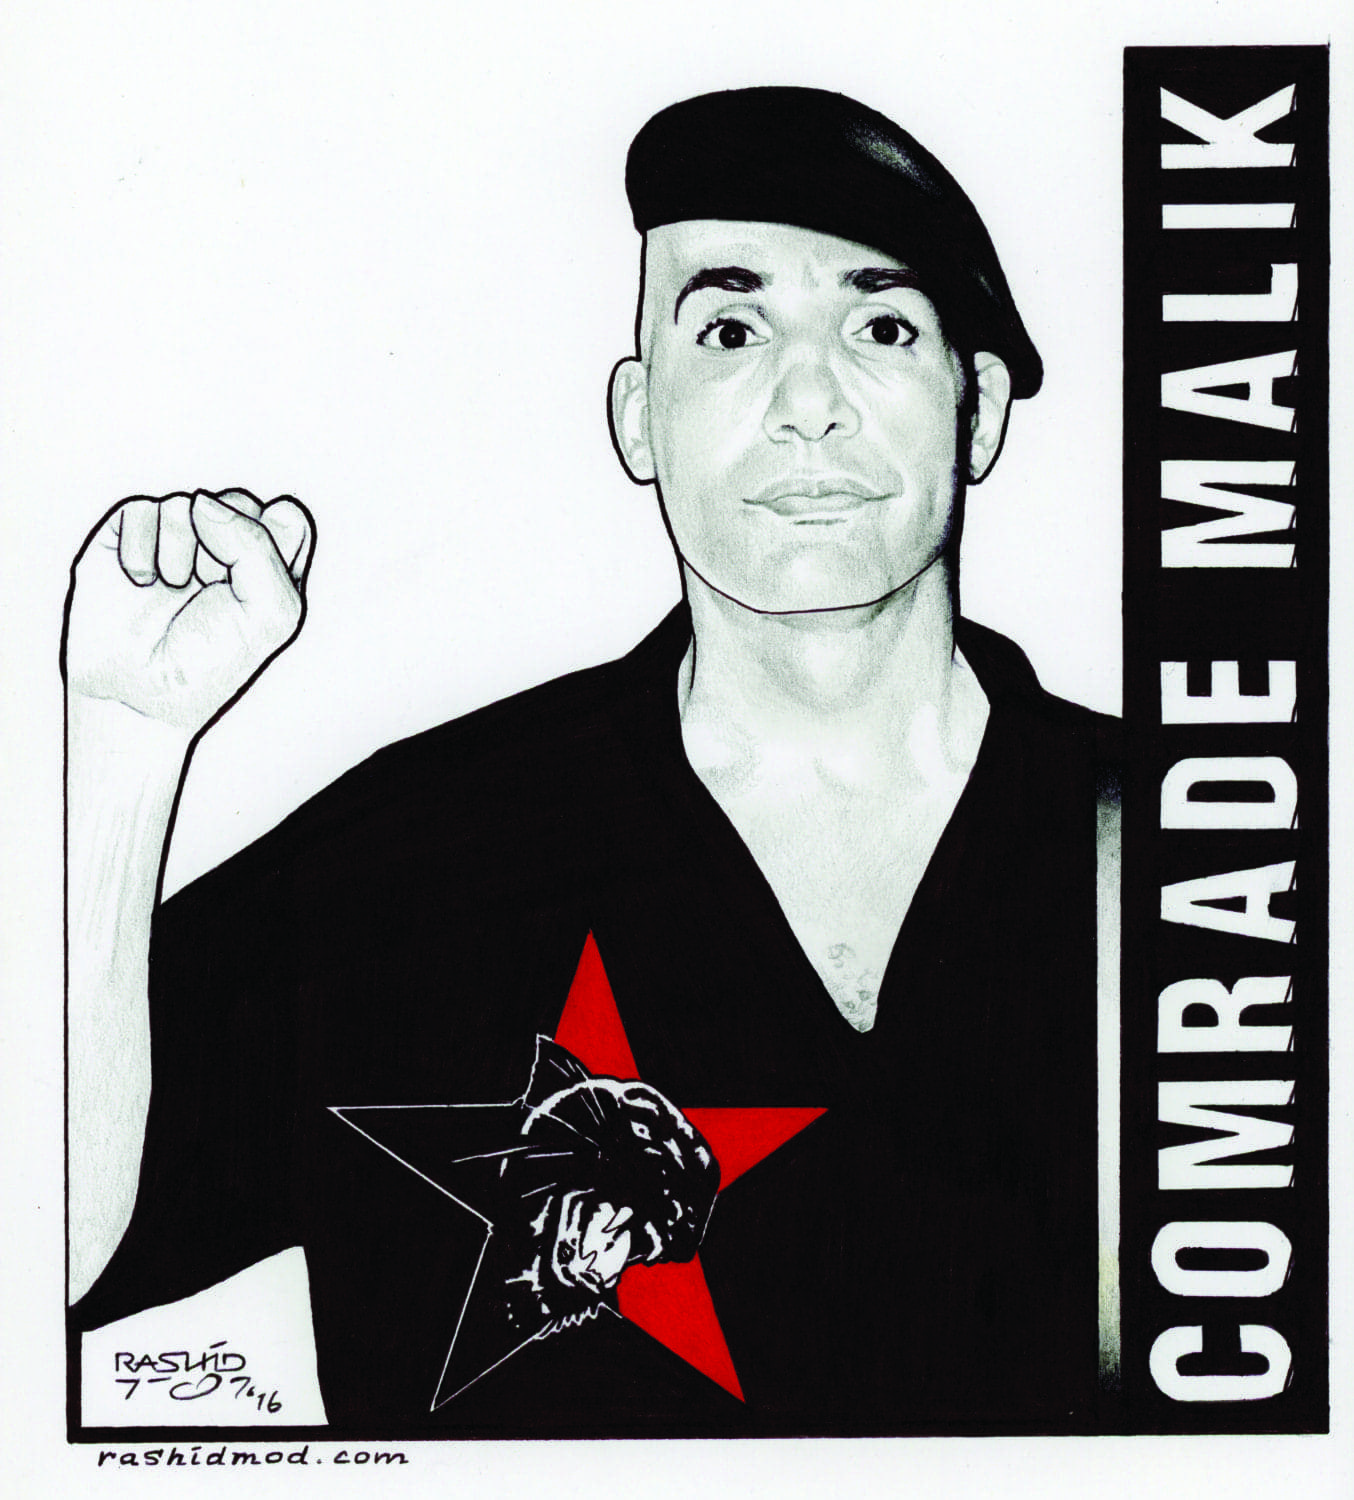 Comrade-Malik-art-by-Rashid-1116, Federal court in Louisiana ignores COVID terror inside FCI Oakdale, Abolition Now! 